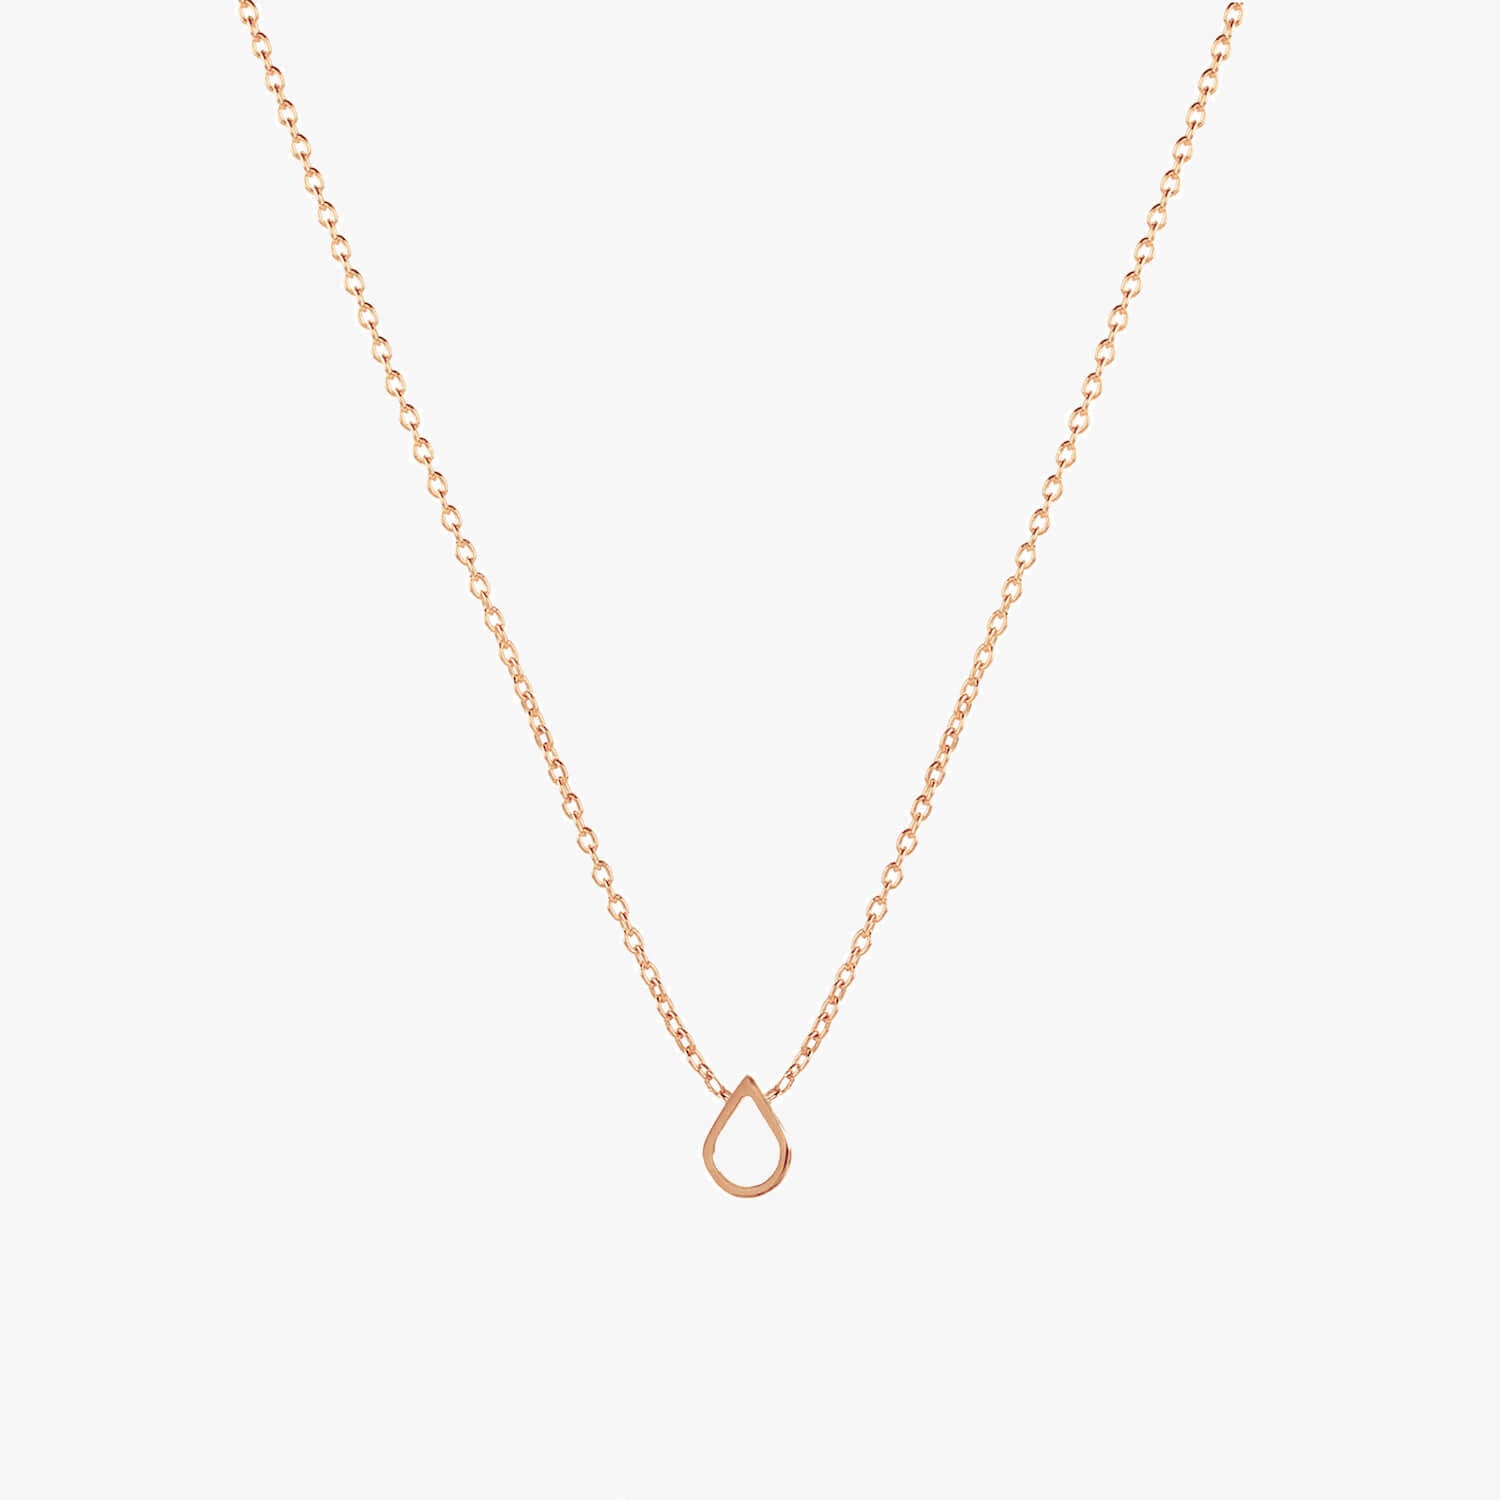 A rose gold Classic Teardrop Necklace on a white background